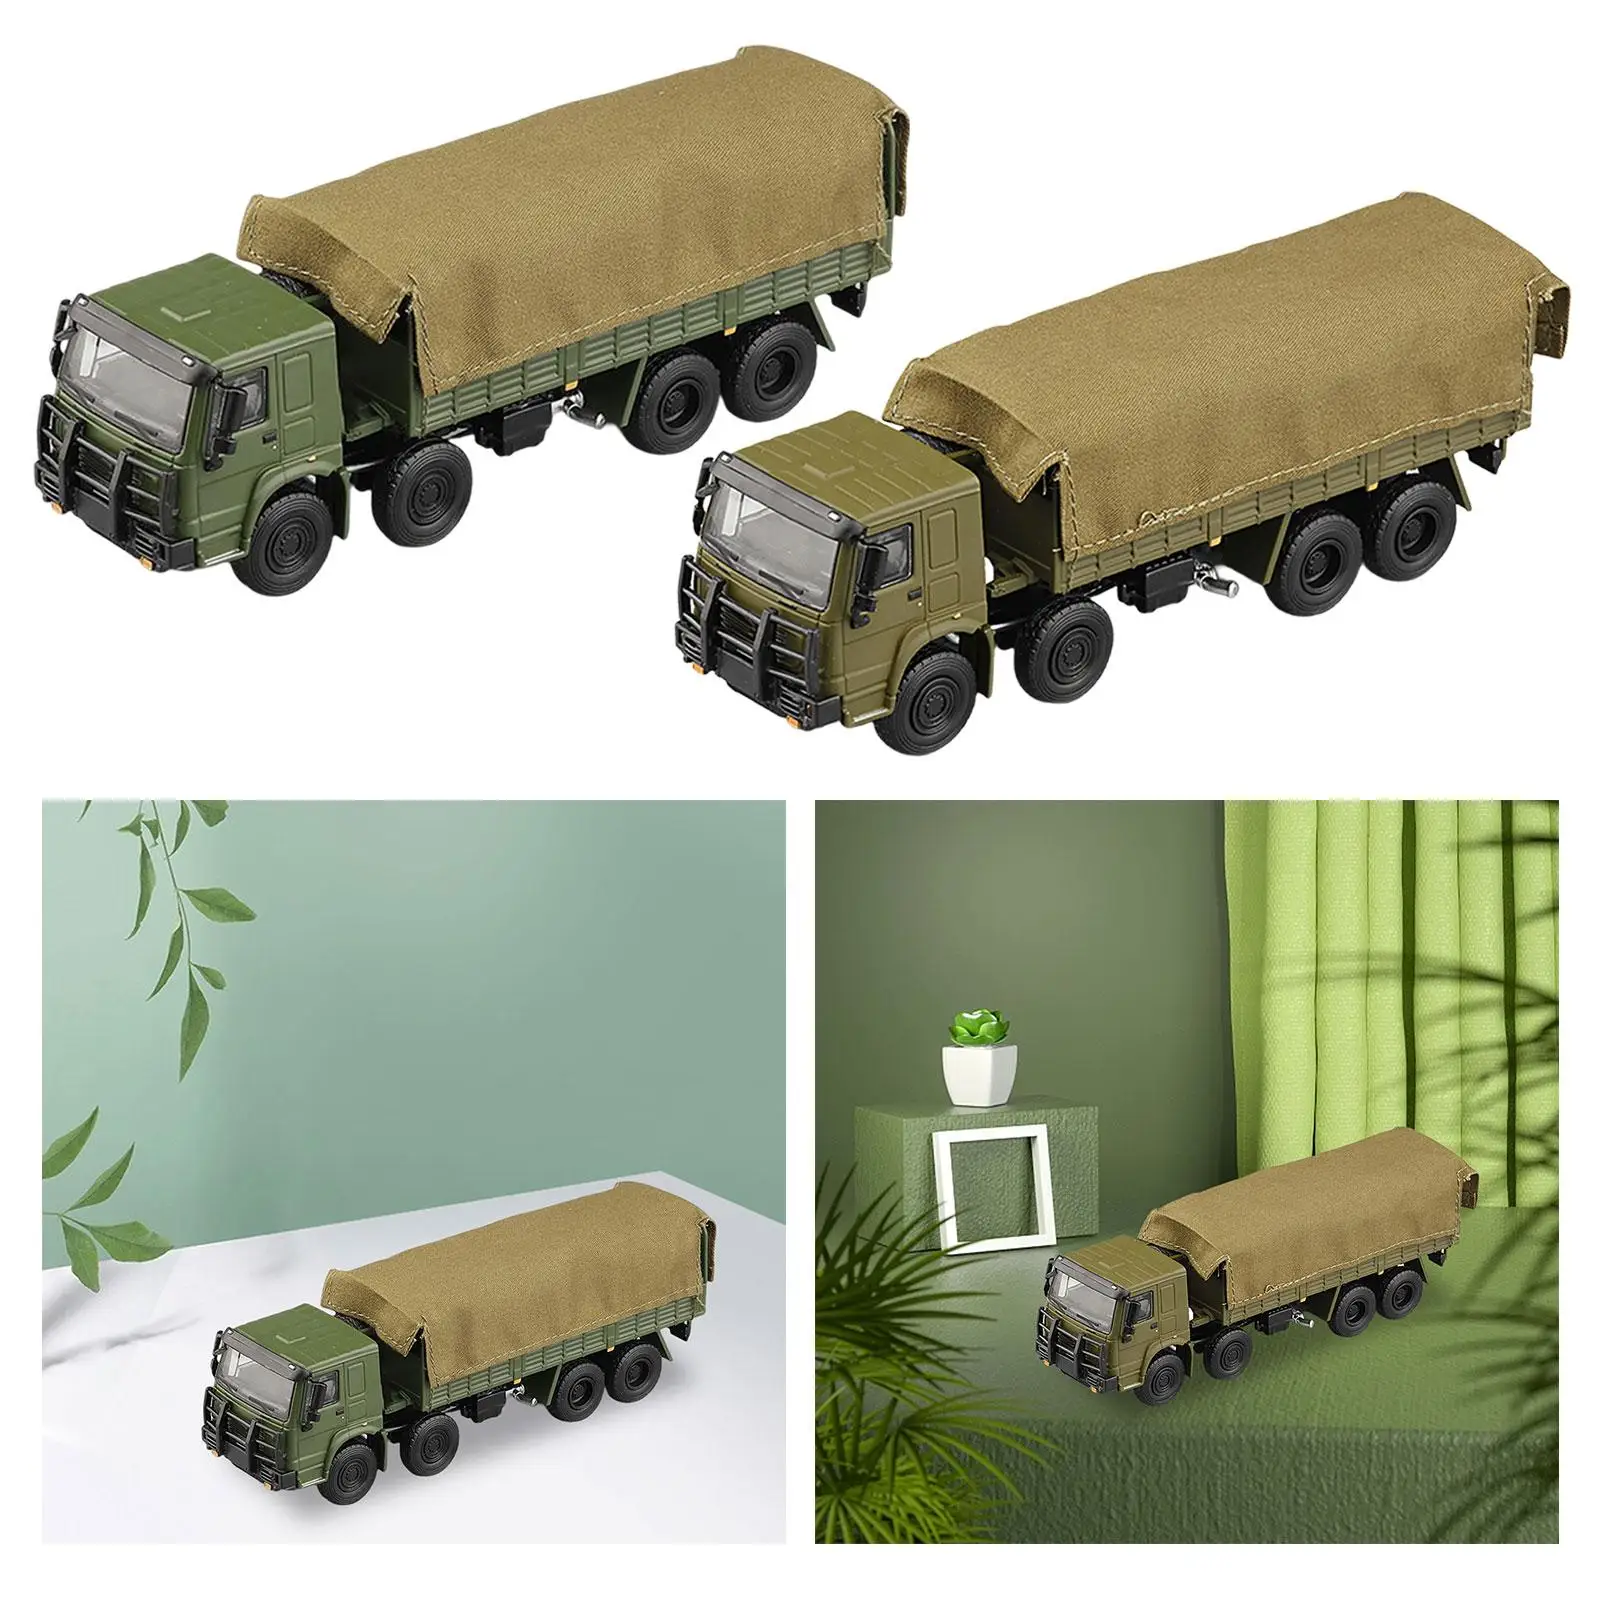 1/64 Transport Truck Diorama Scenes Adults Gifts Mini Vehicles Toys for Diorama Photography Props Miniature Scene Layout Decor